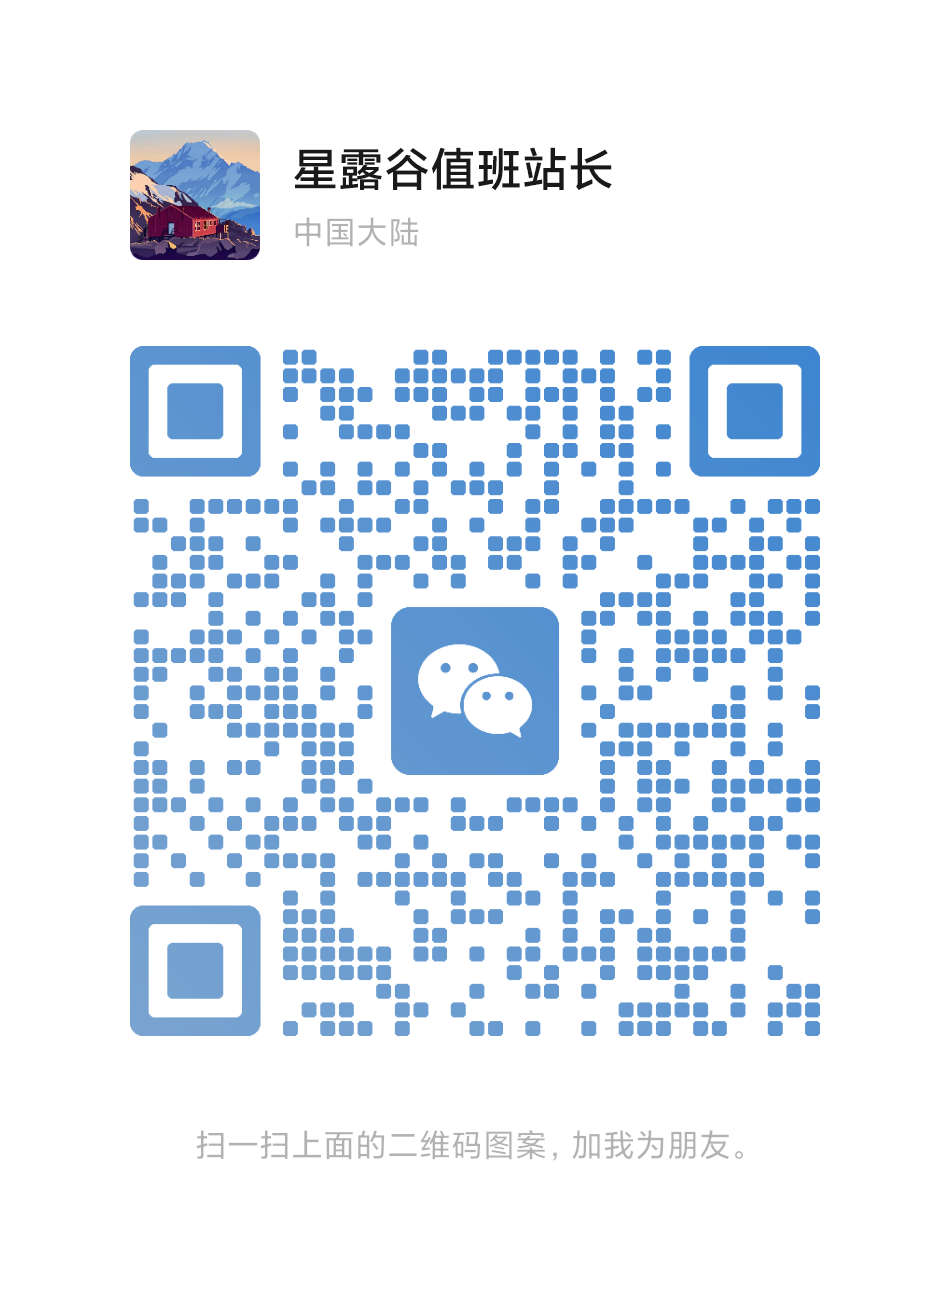 mmqrcode1677734711721.png